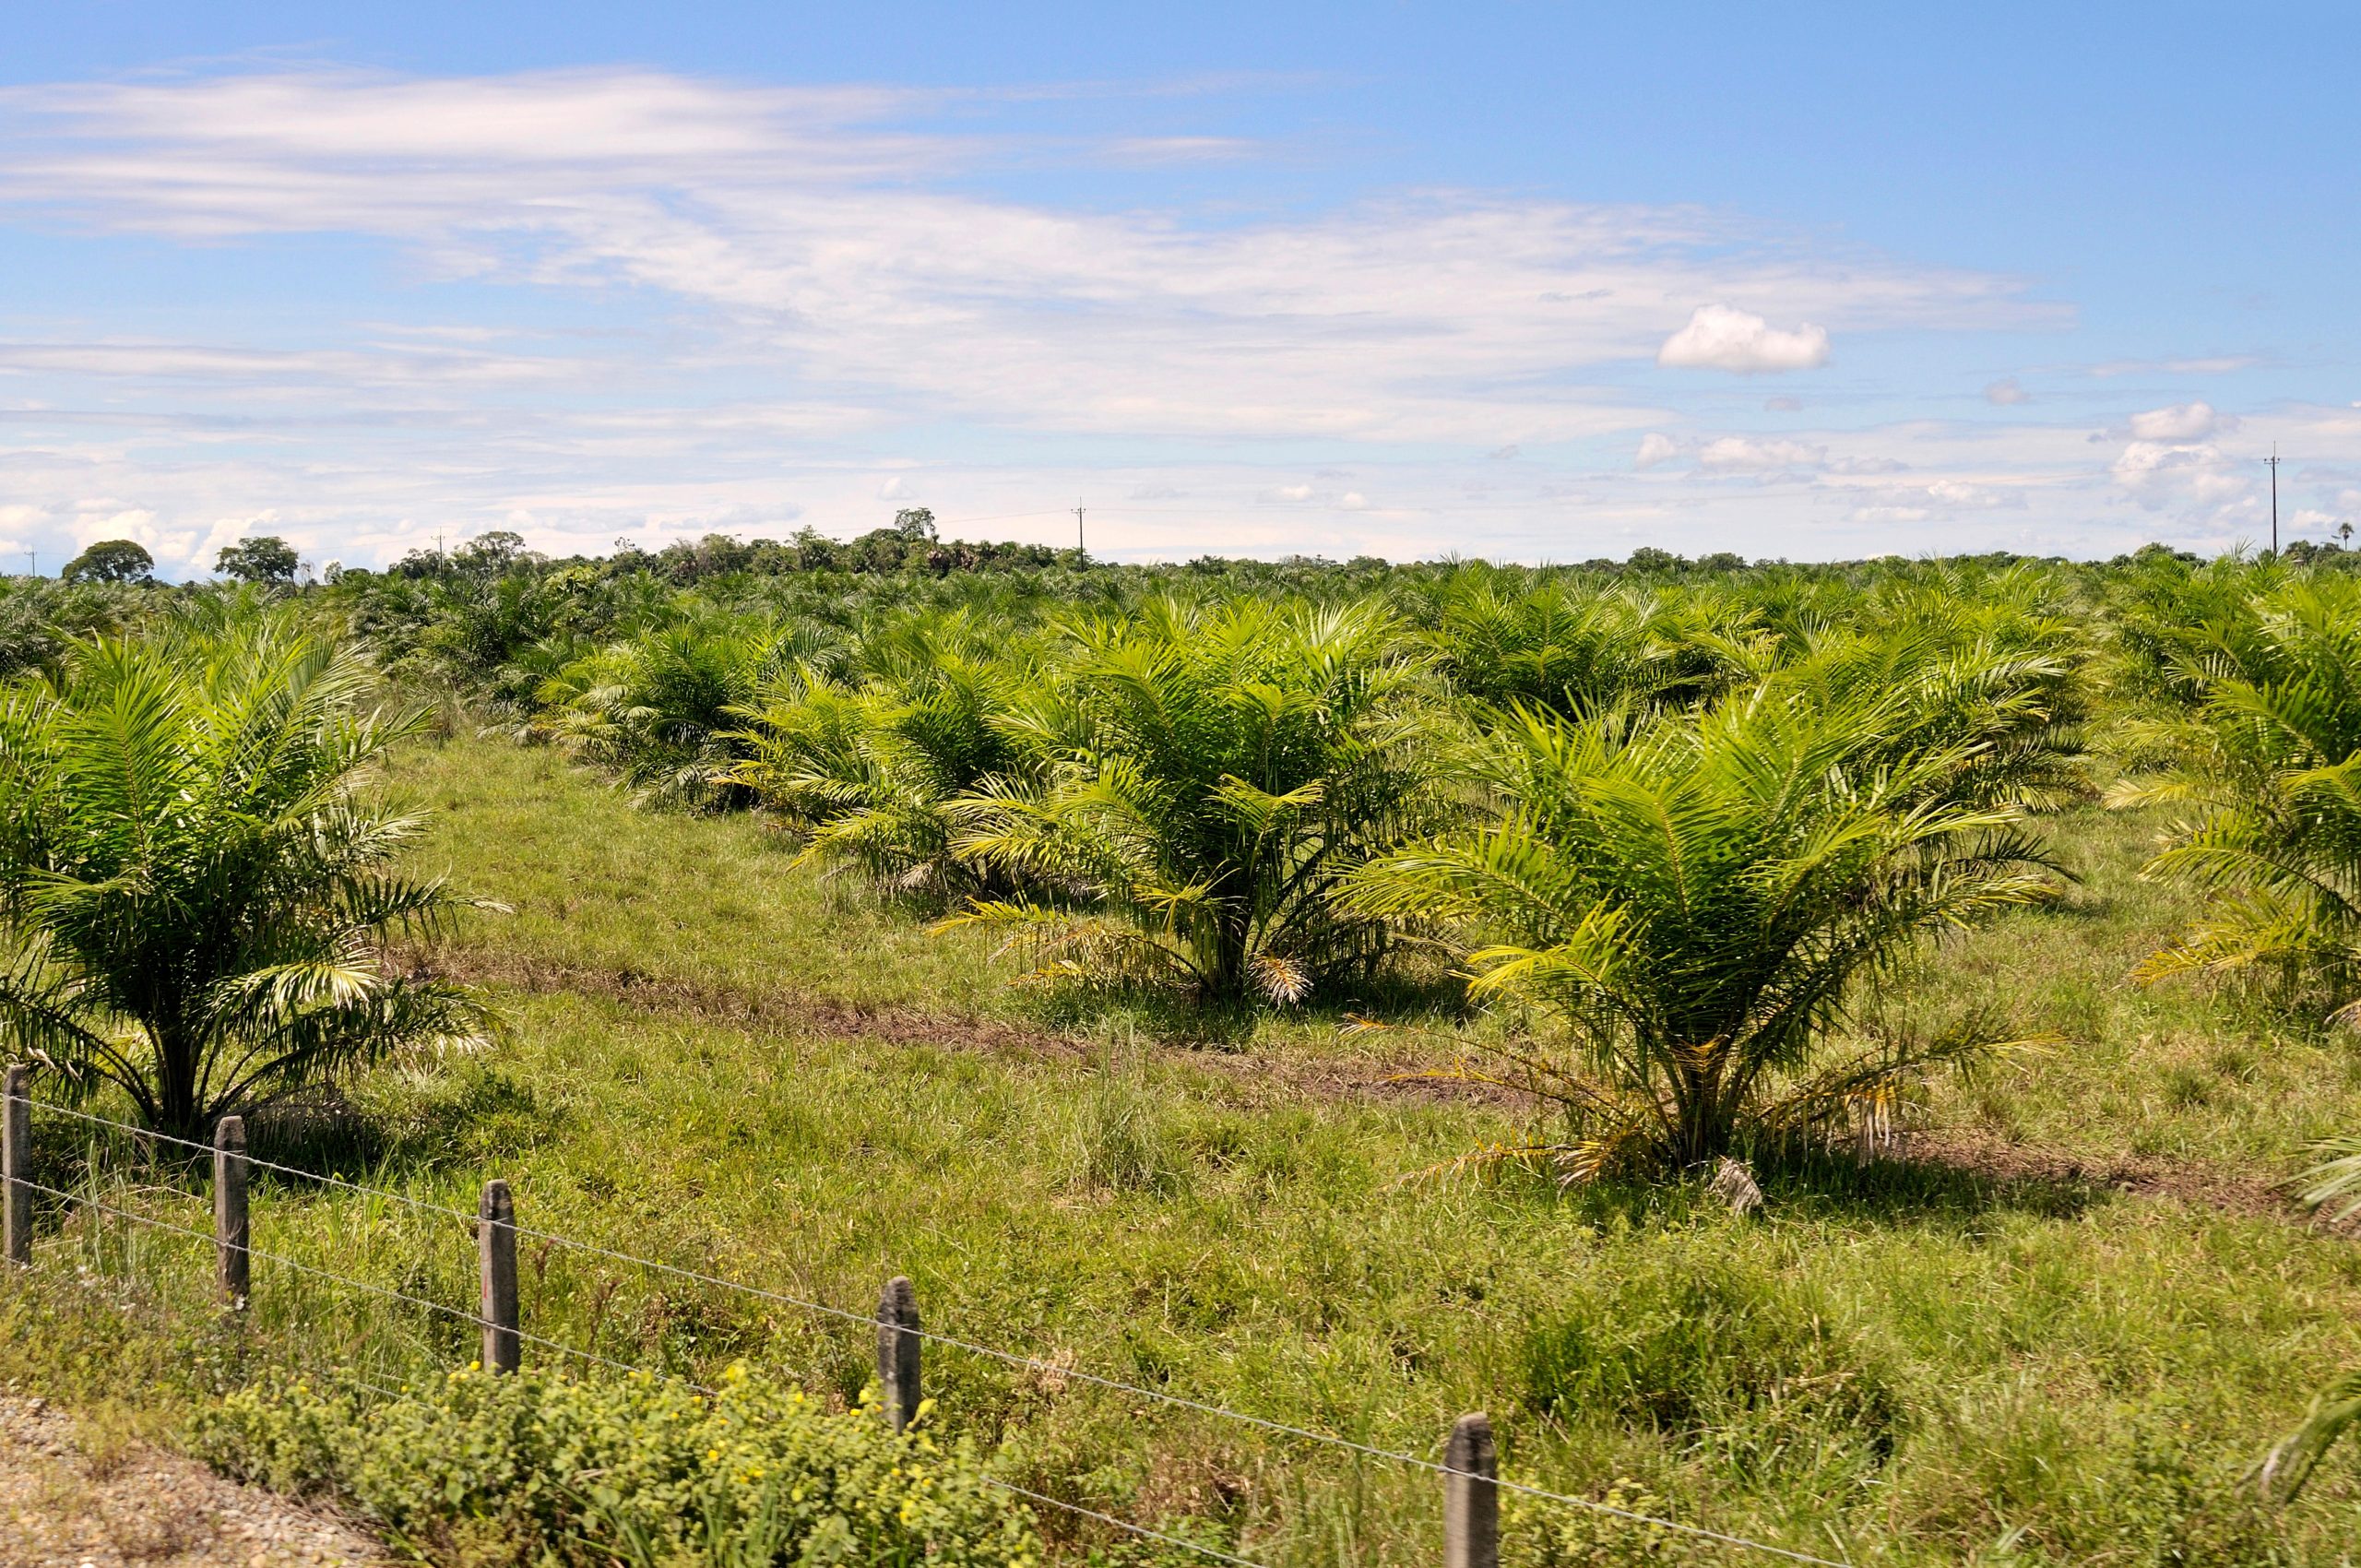 <p>A palm oil plantation in Meta province, Colombia. After significant growth in the country&#8217;s industry in recent decades, it has become the world&#8217;s fourth largest producer and exporter of palm oil, while nearly a third of its production complies with sustainability certification. But it faces challenges to sustain and increase this percentage. (Image: Florian Kopp / Alamy)</p>